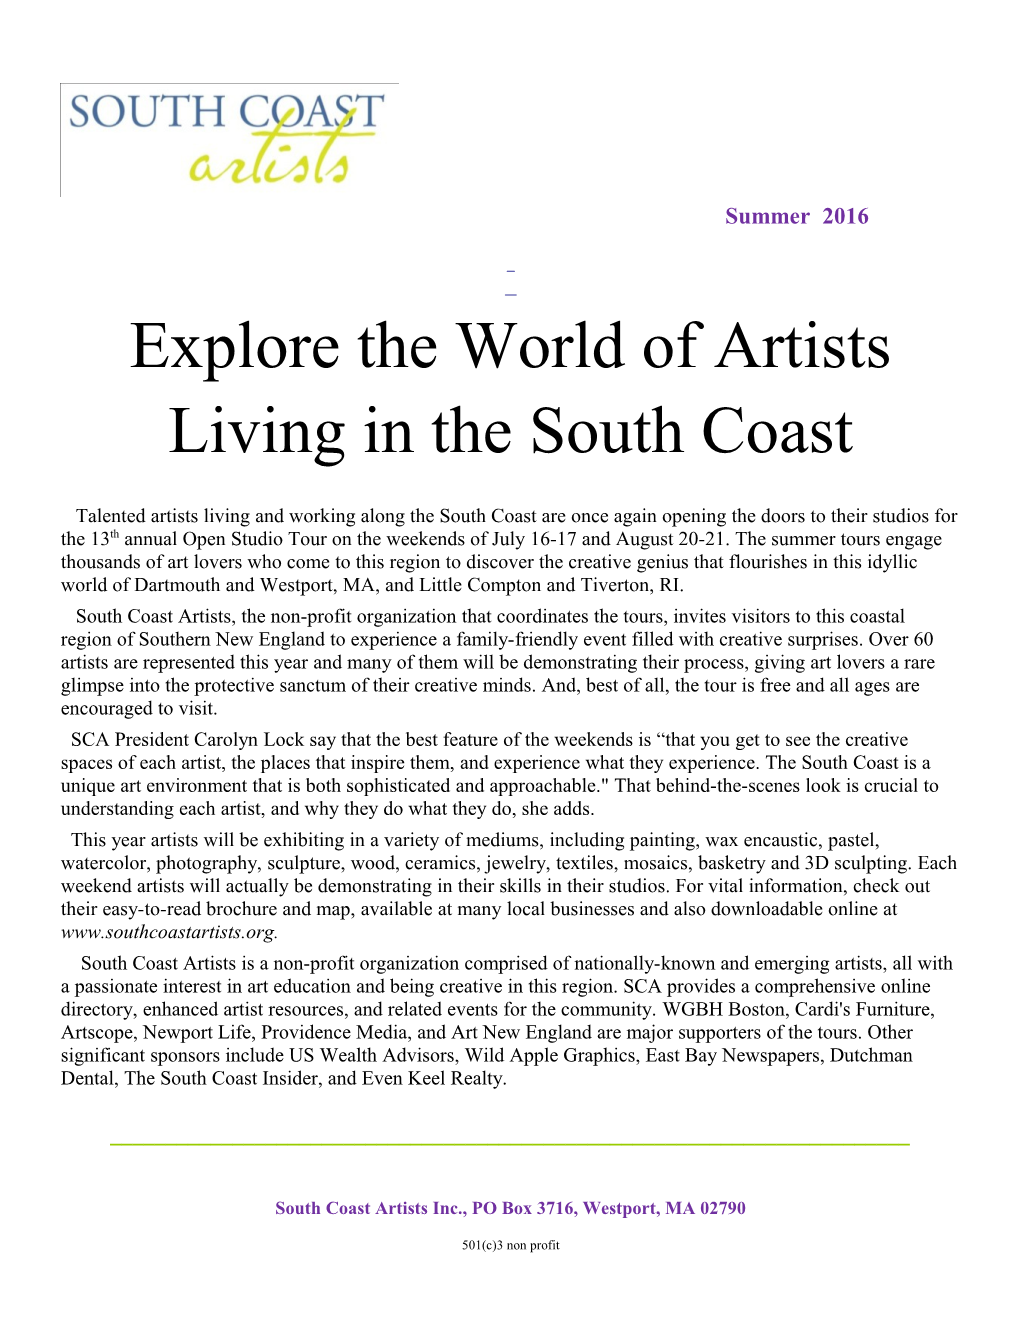 Explore the World of Artists